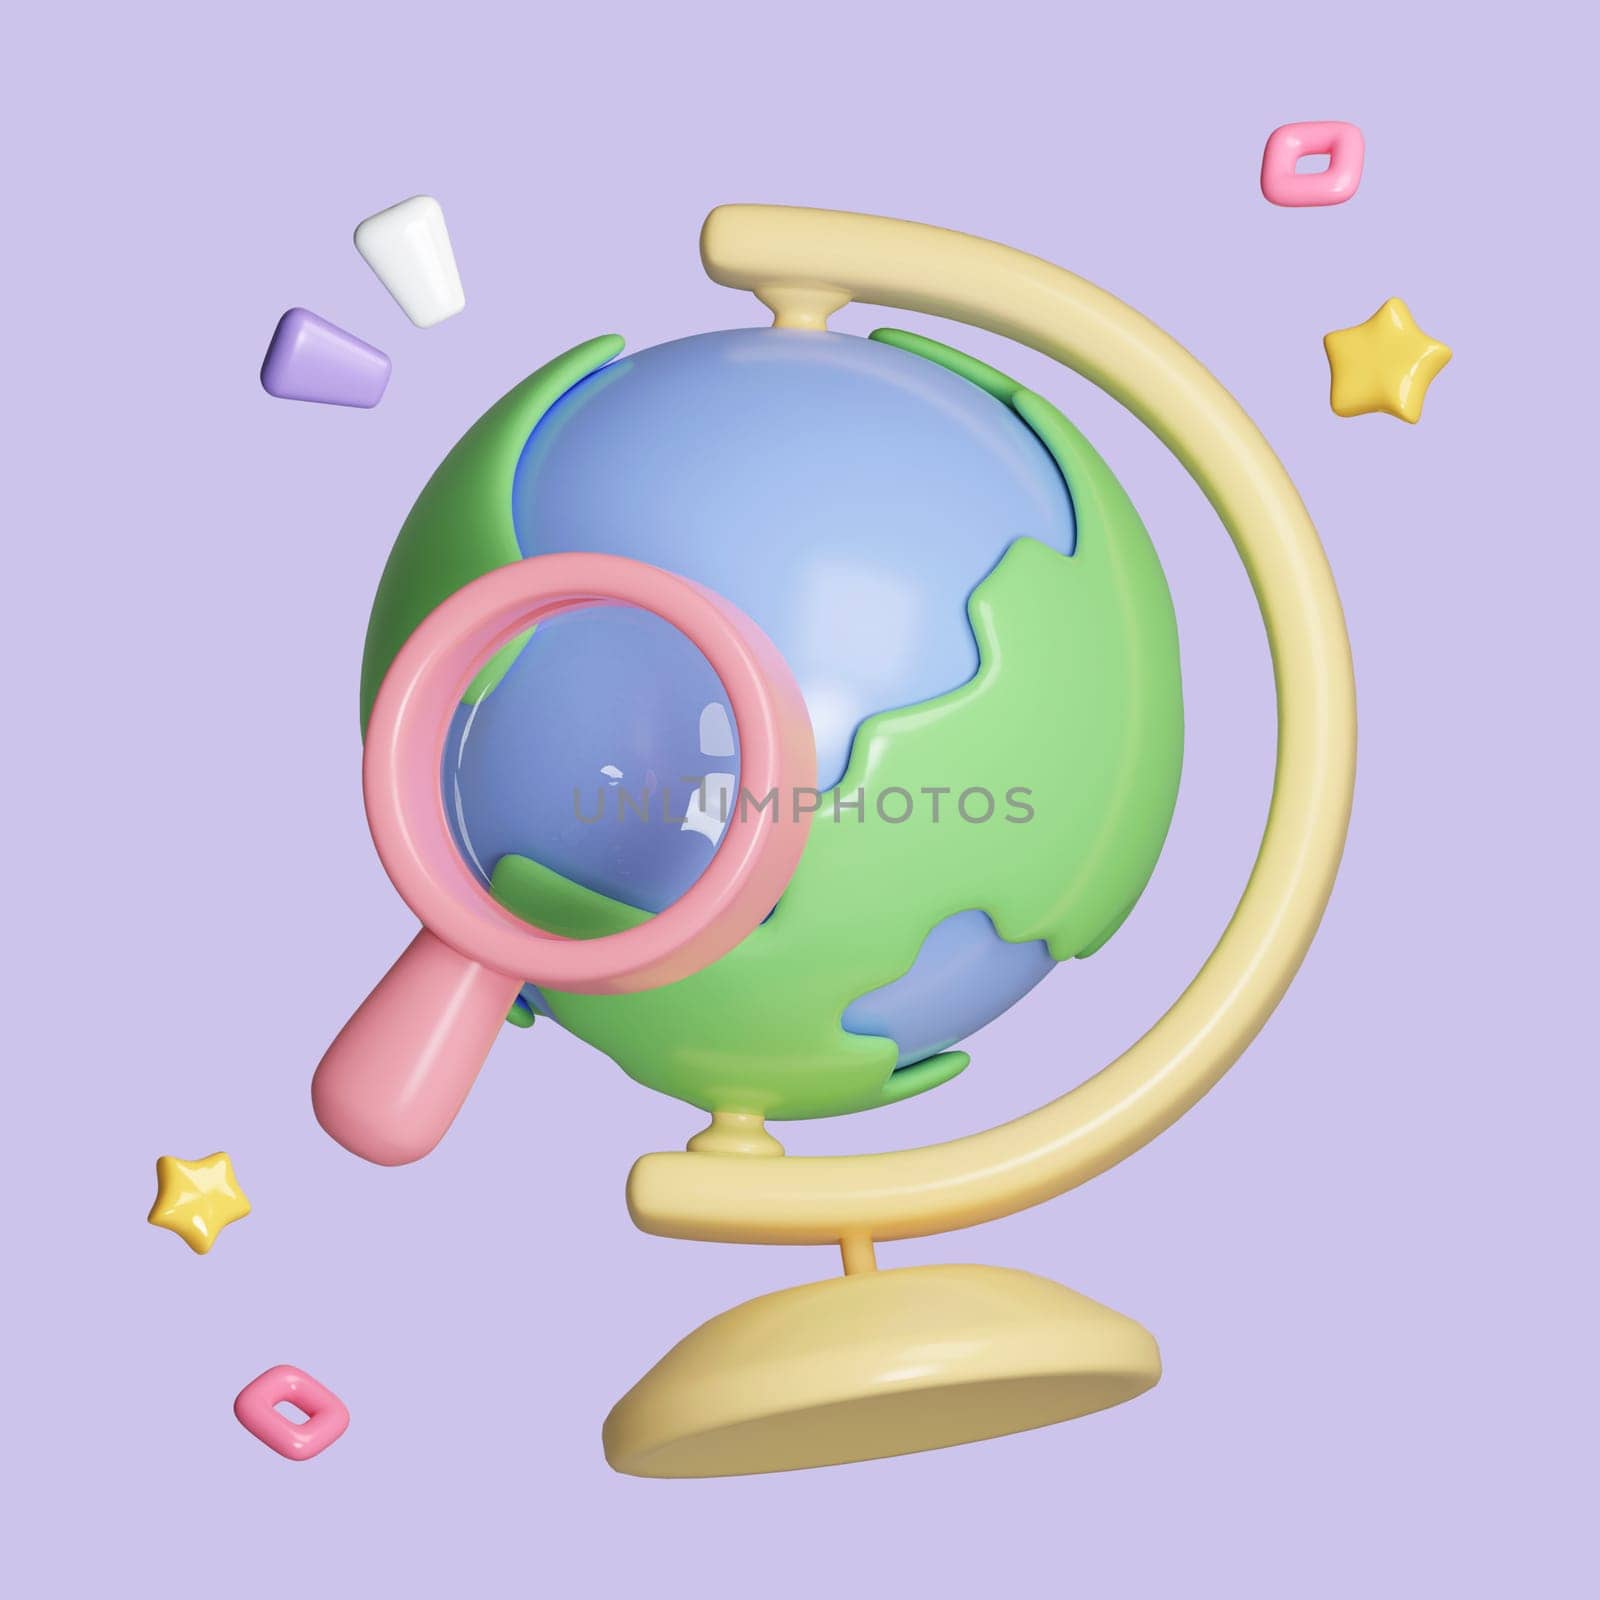 Cartoon Earth globe and magnifying glass searching concept. Planet Earth model with world map on base isolated on pastel background. 3d render illustration.